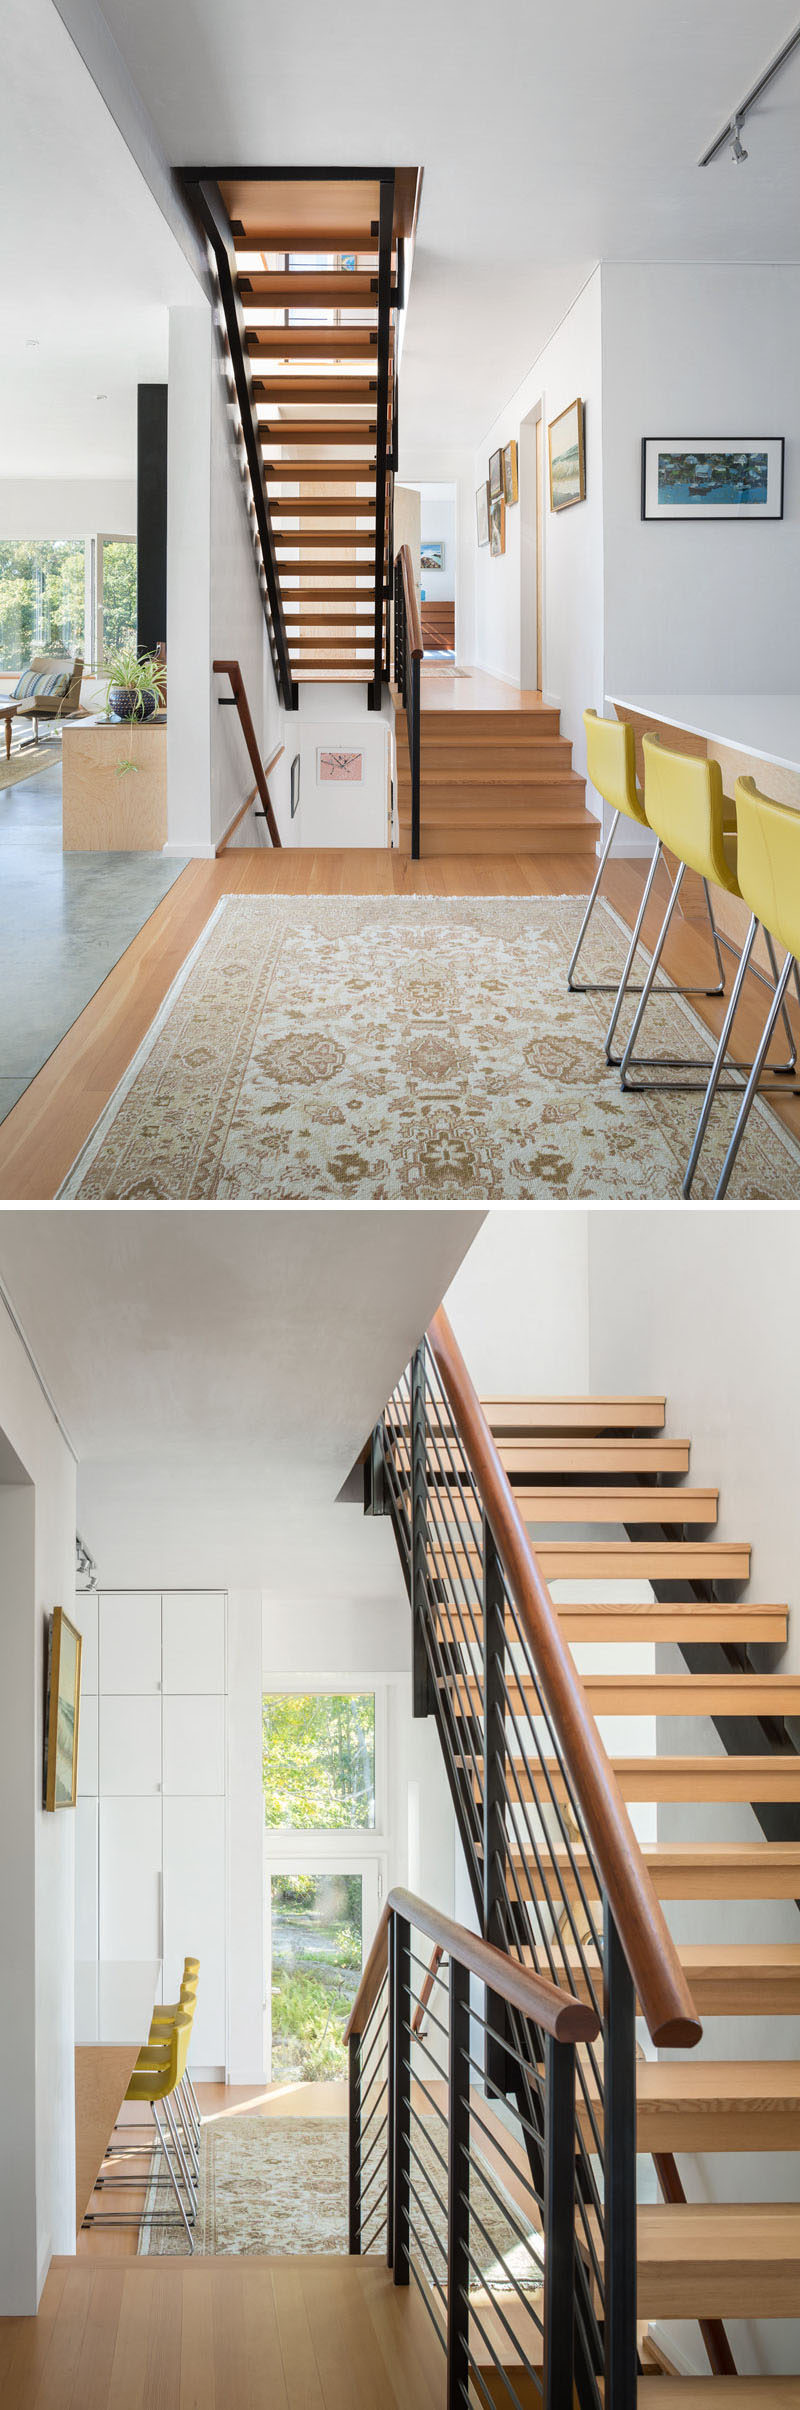 Wood and steel stairs match the wood flooring in the kitchen of this home.